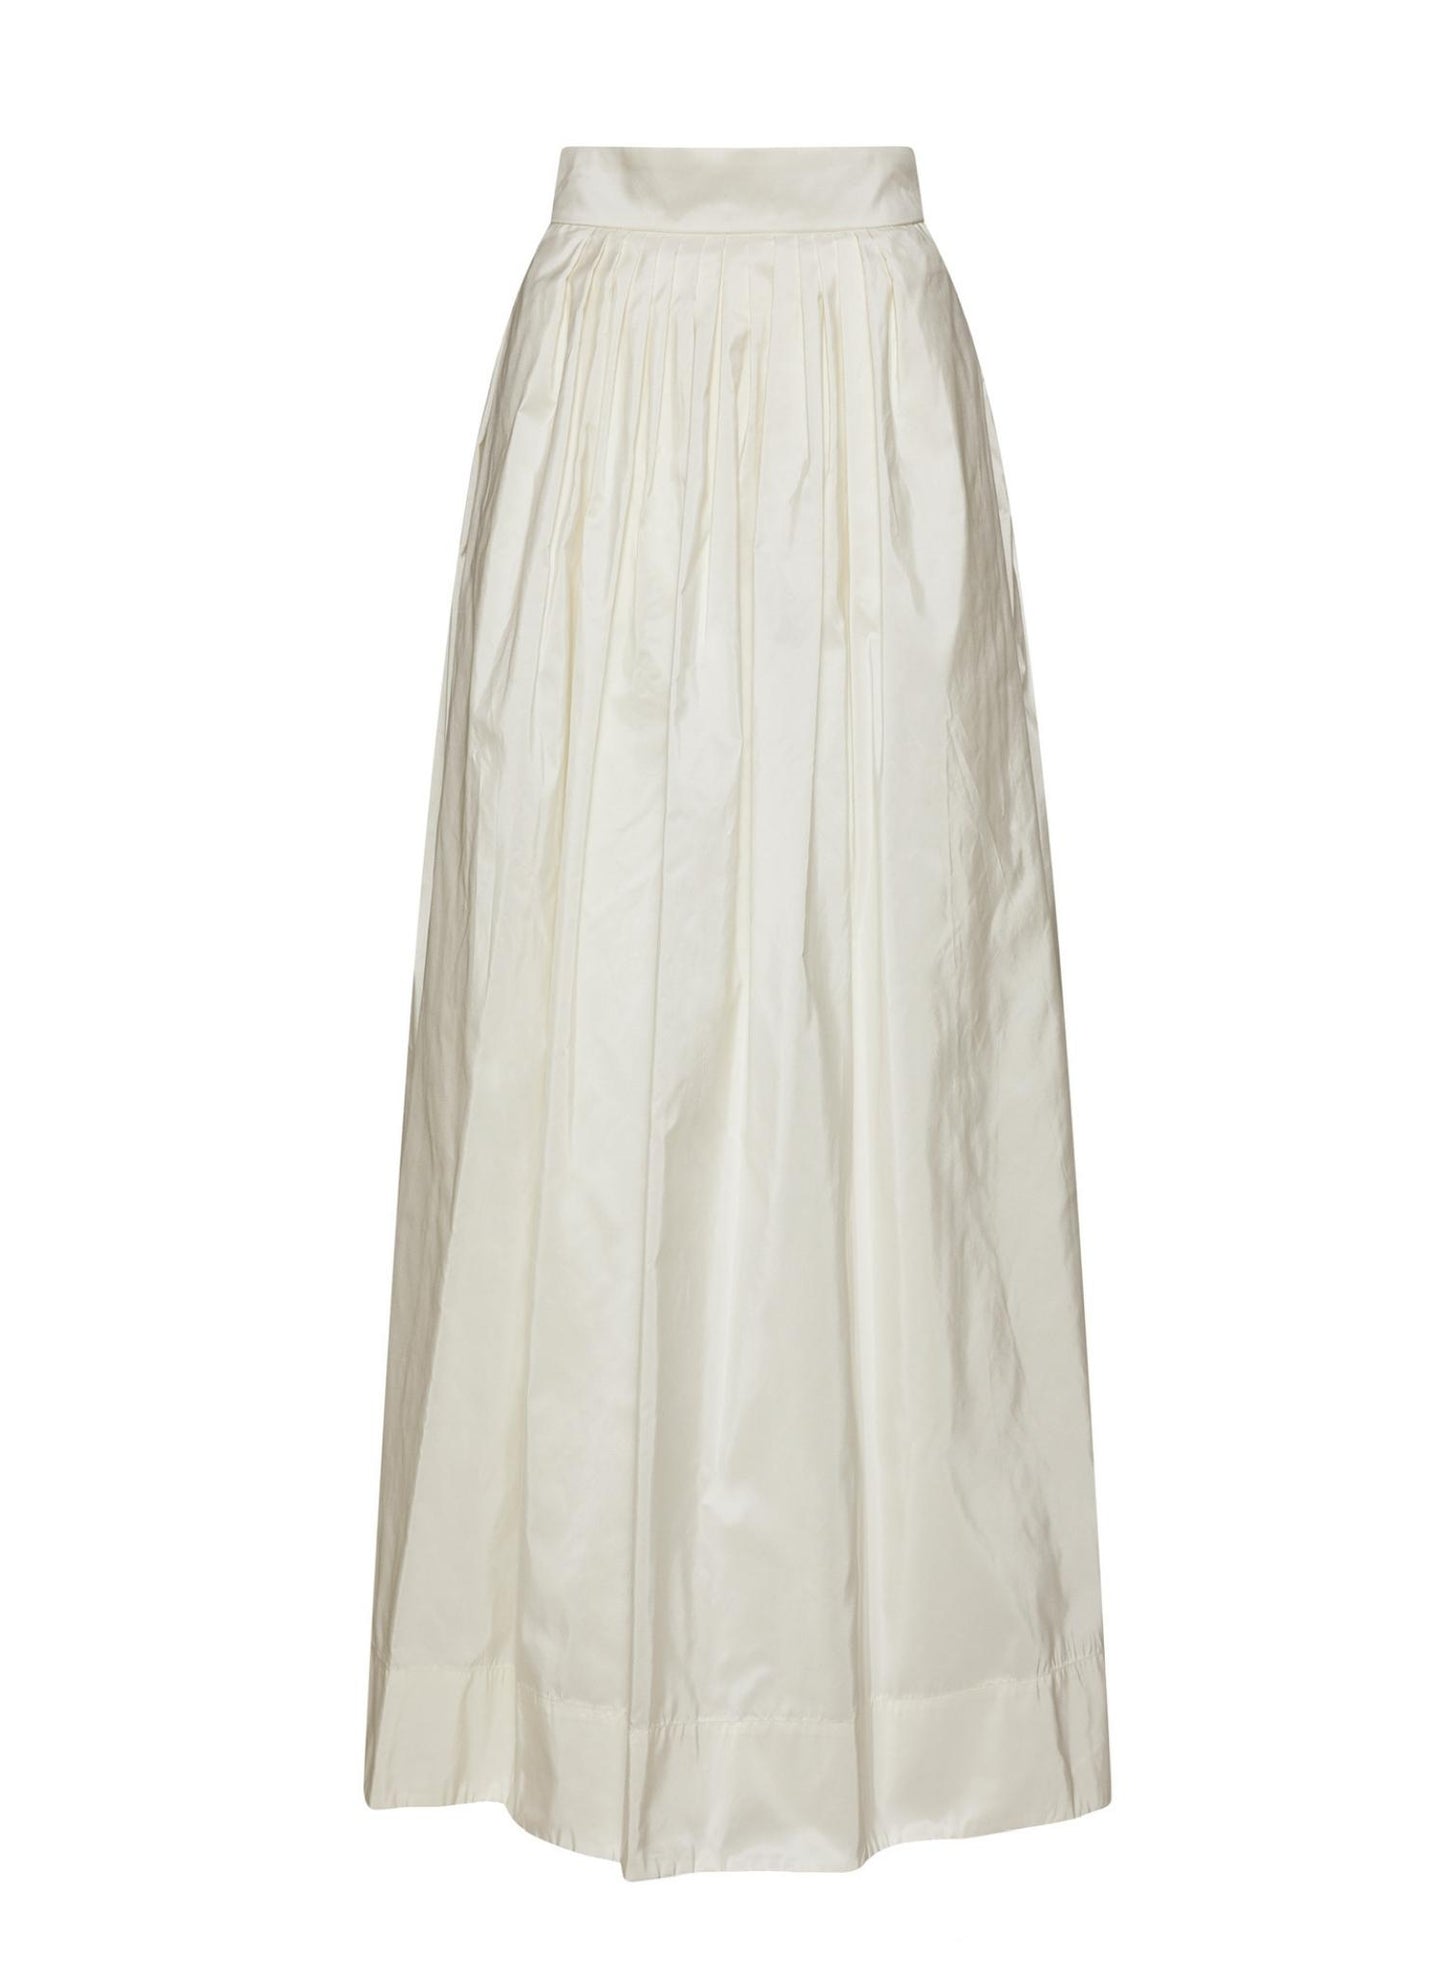 Womens White Tafeta Maxi Ball Skirt with cinched waist and pockets